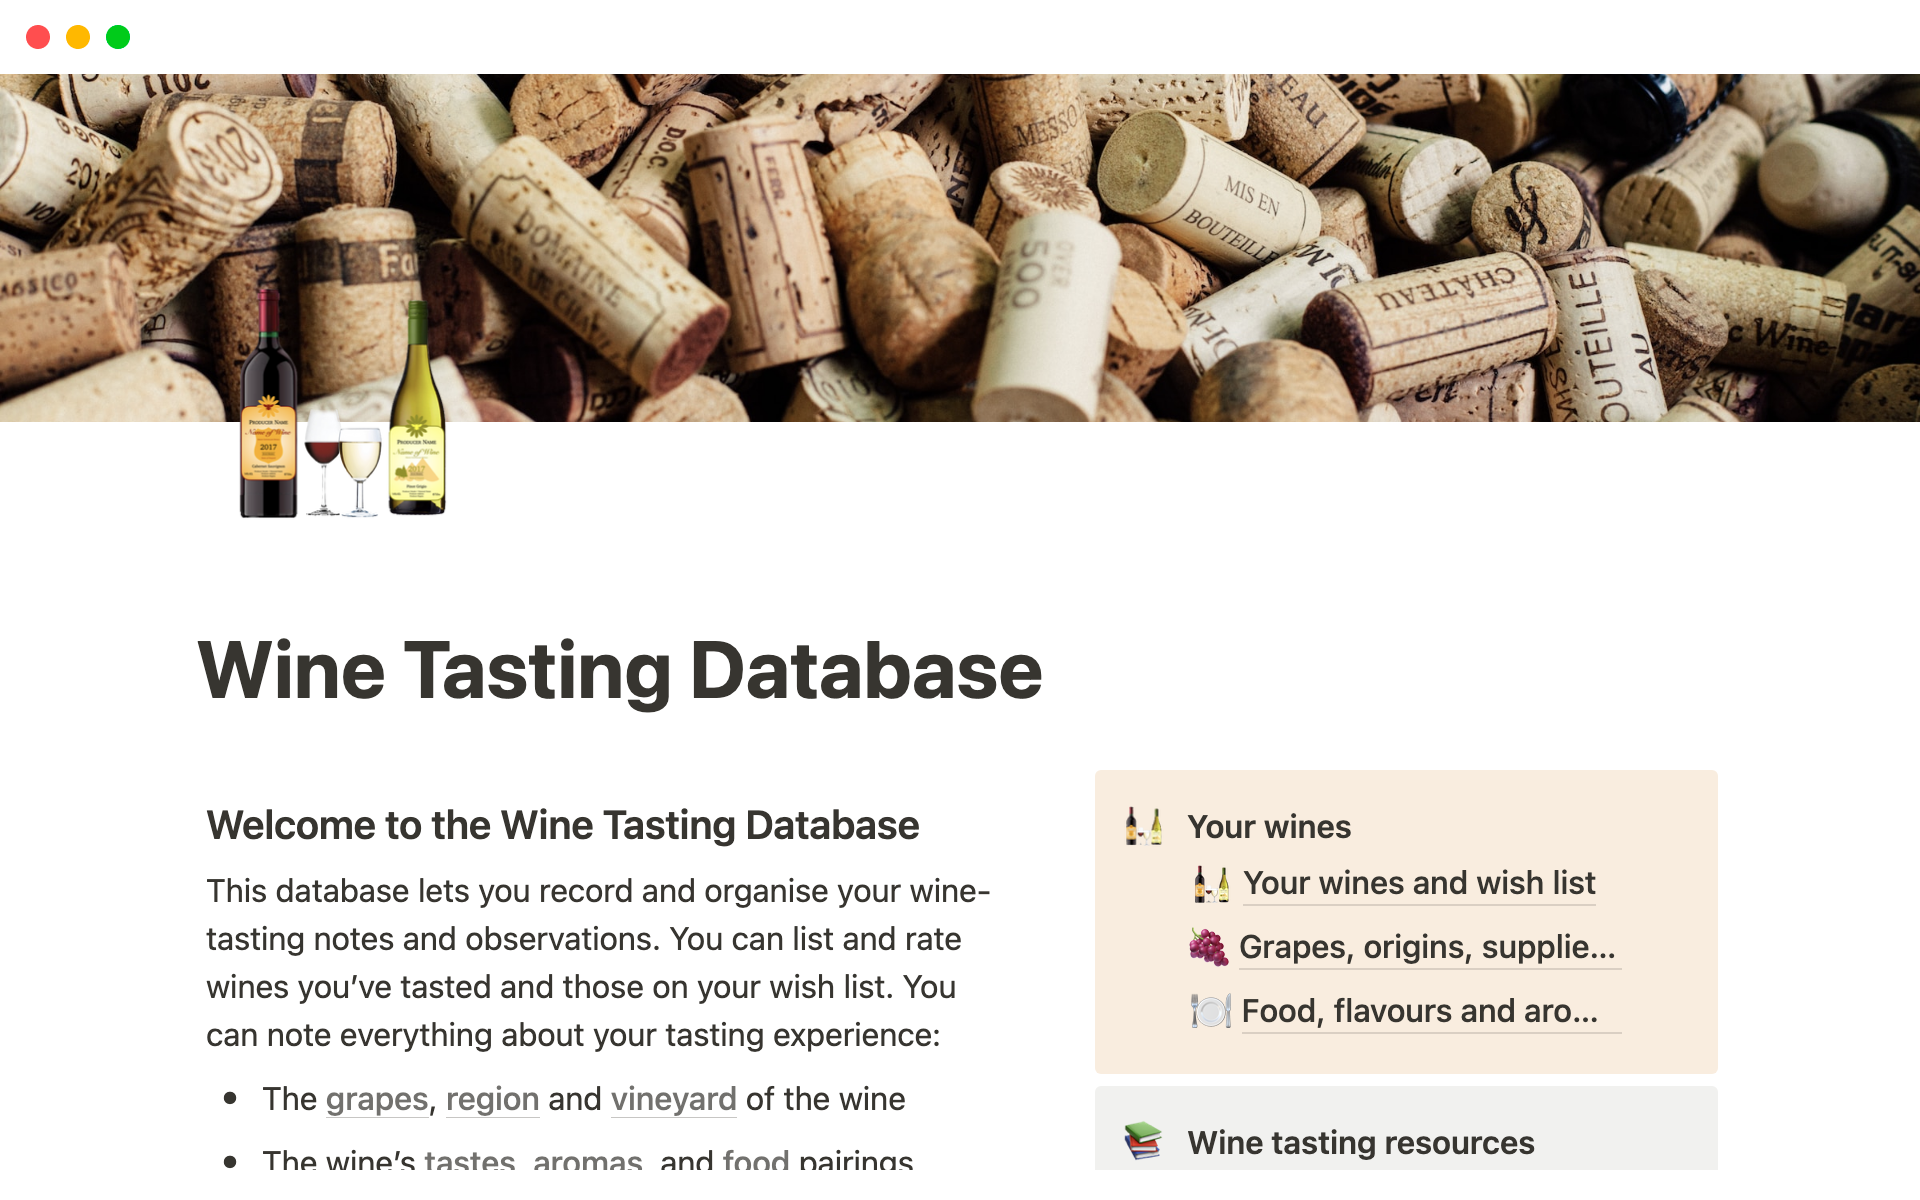 A set of reference material about wine, grapes, varieties, food pairings and more, and a database to record your own tasting notes.